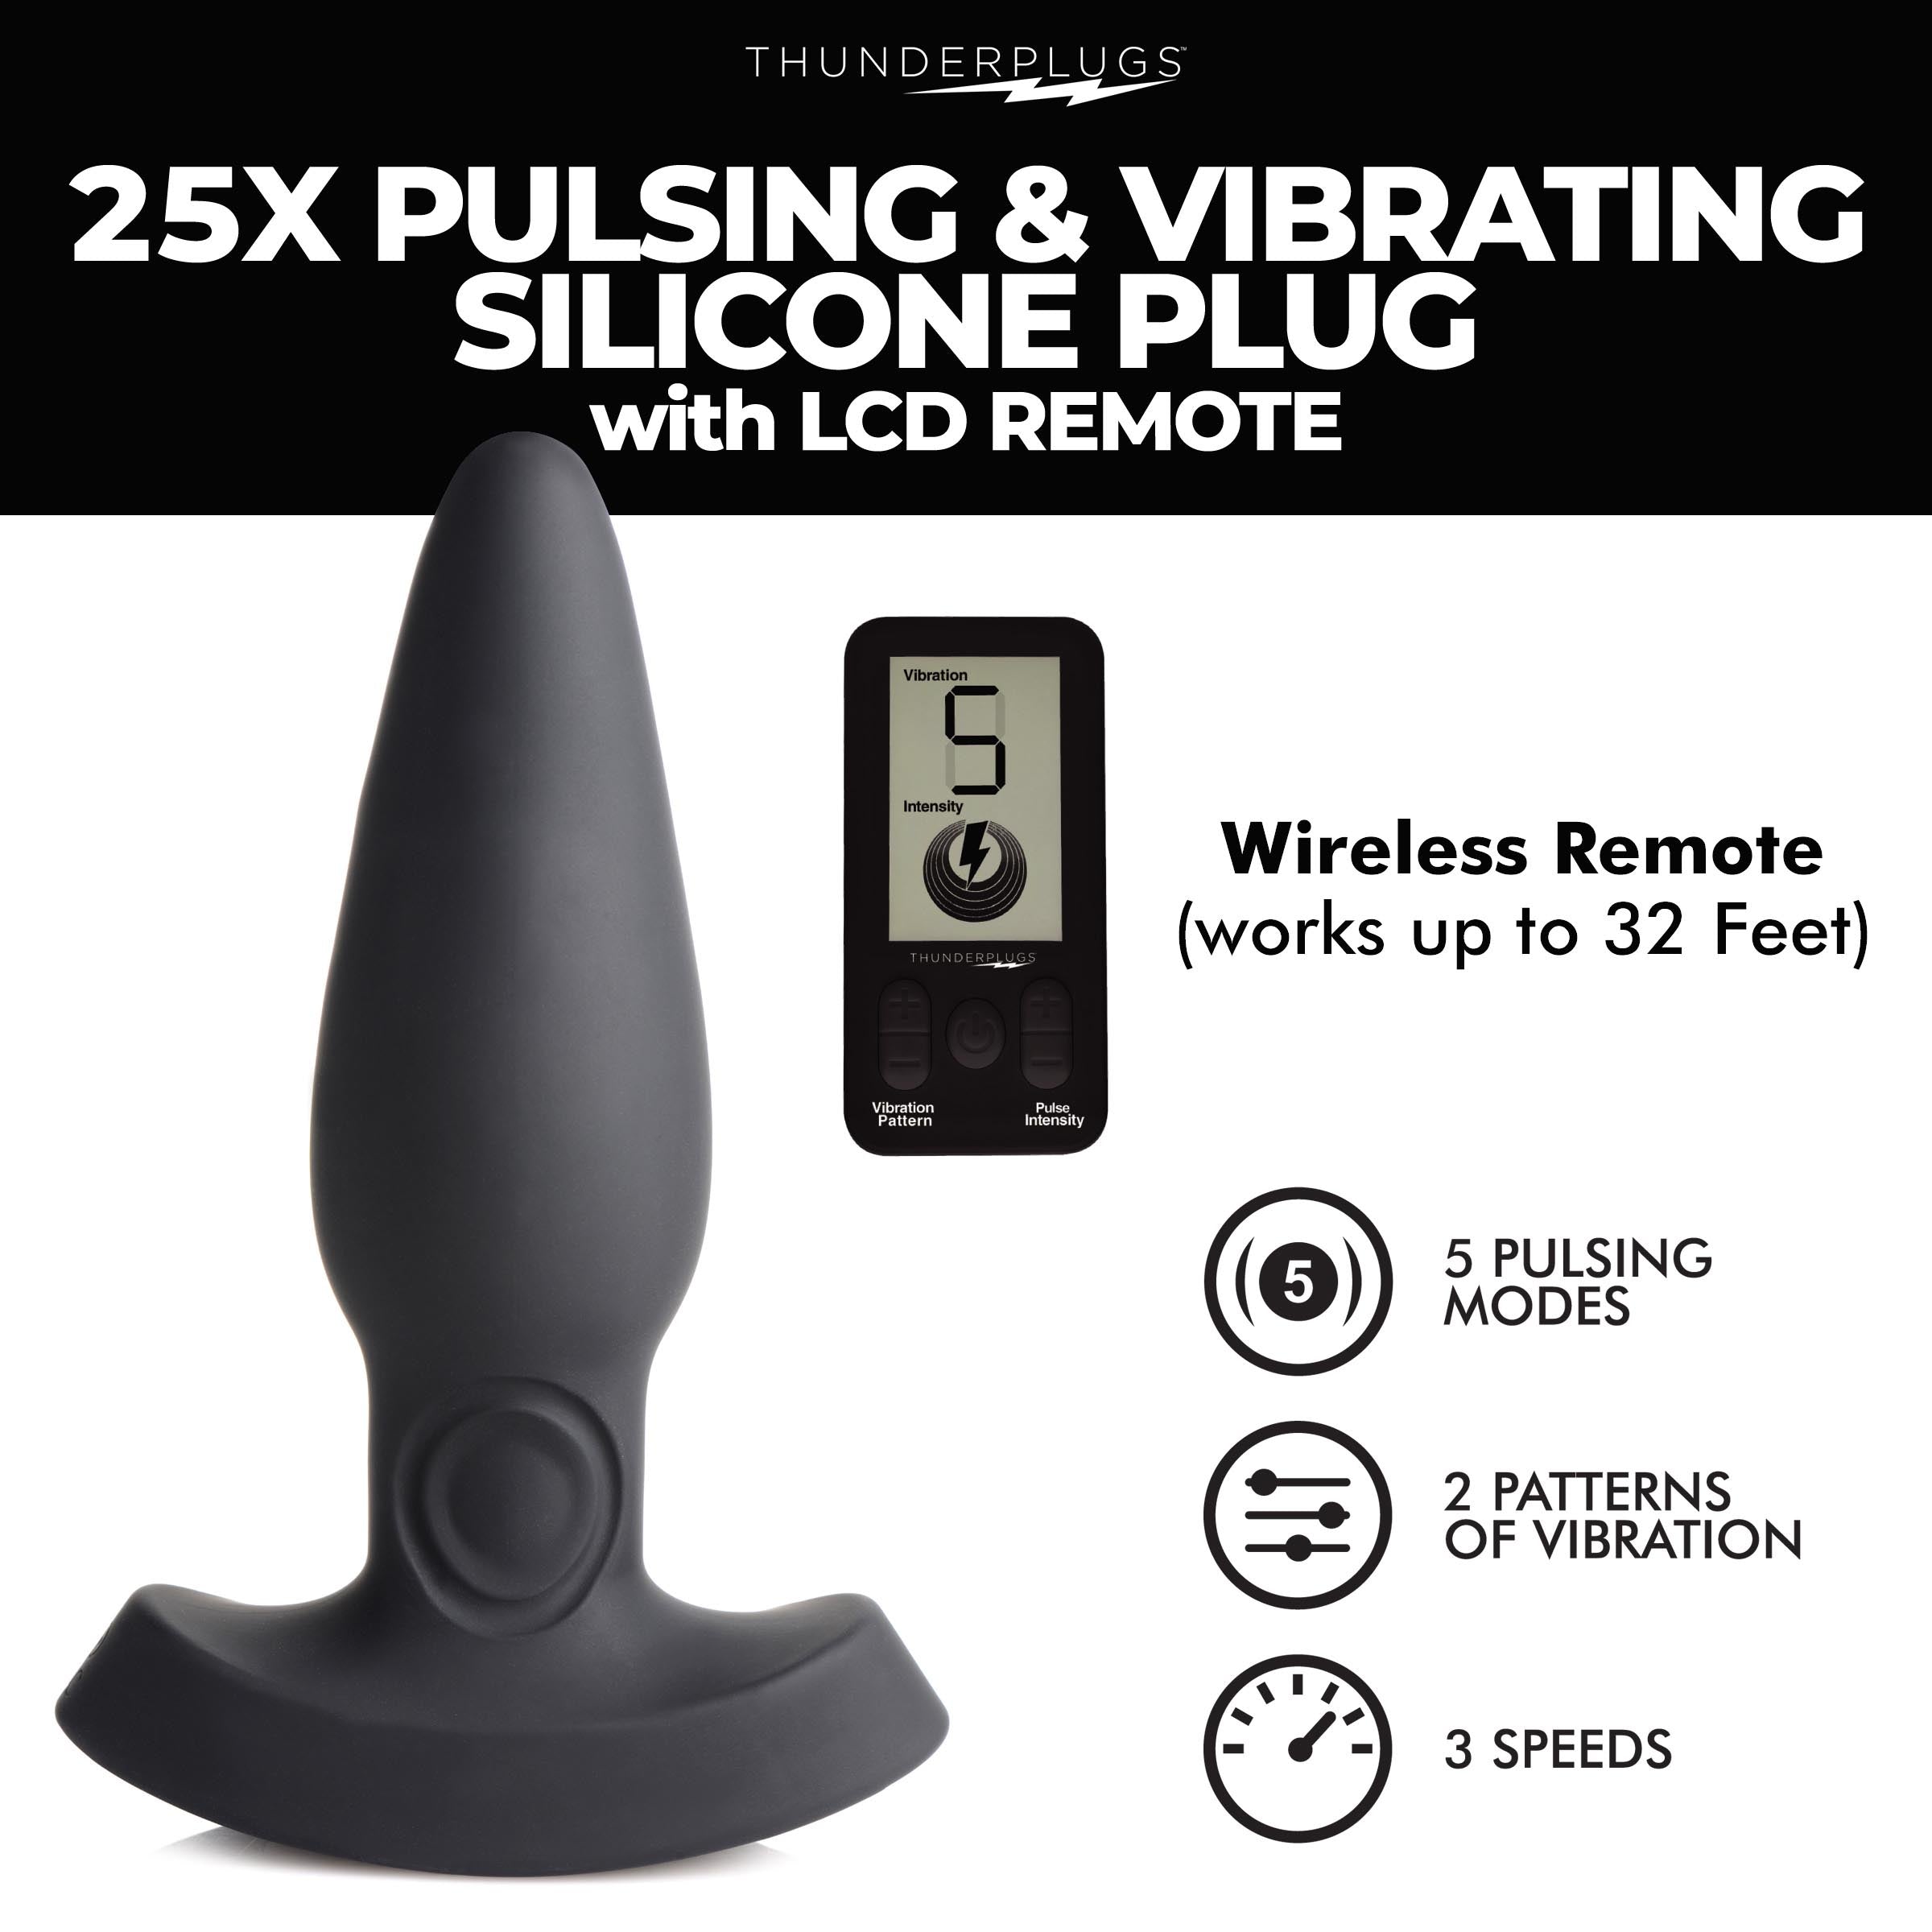 25X Pulsing and Vibrating Silicone Plug with Remote